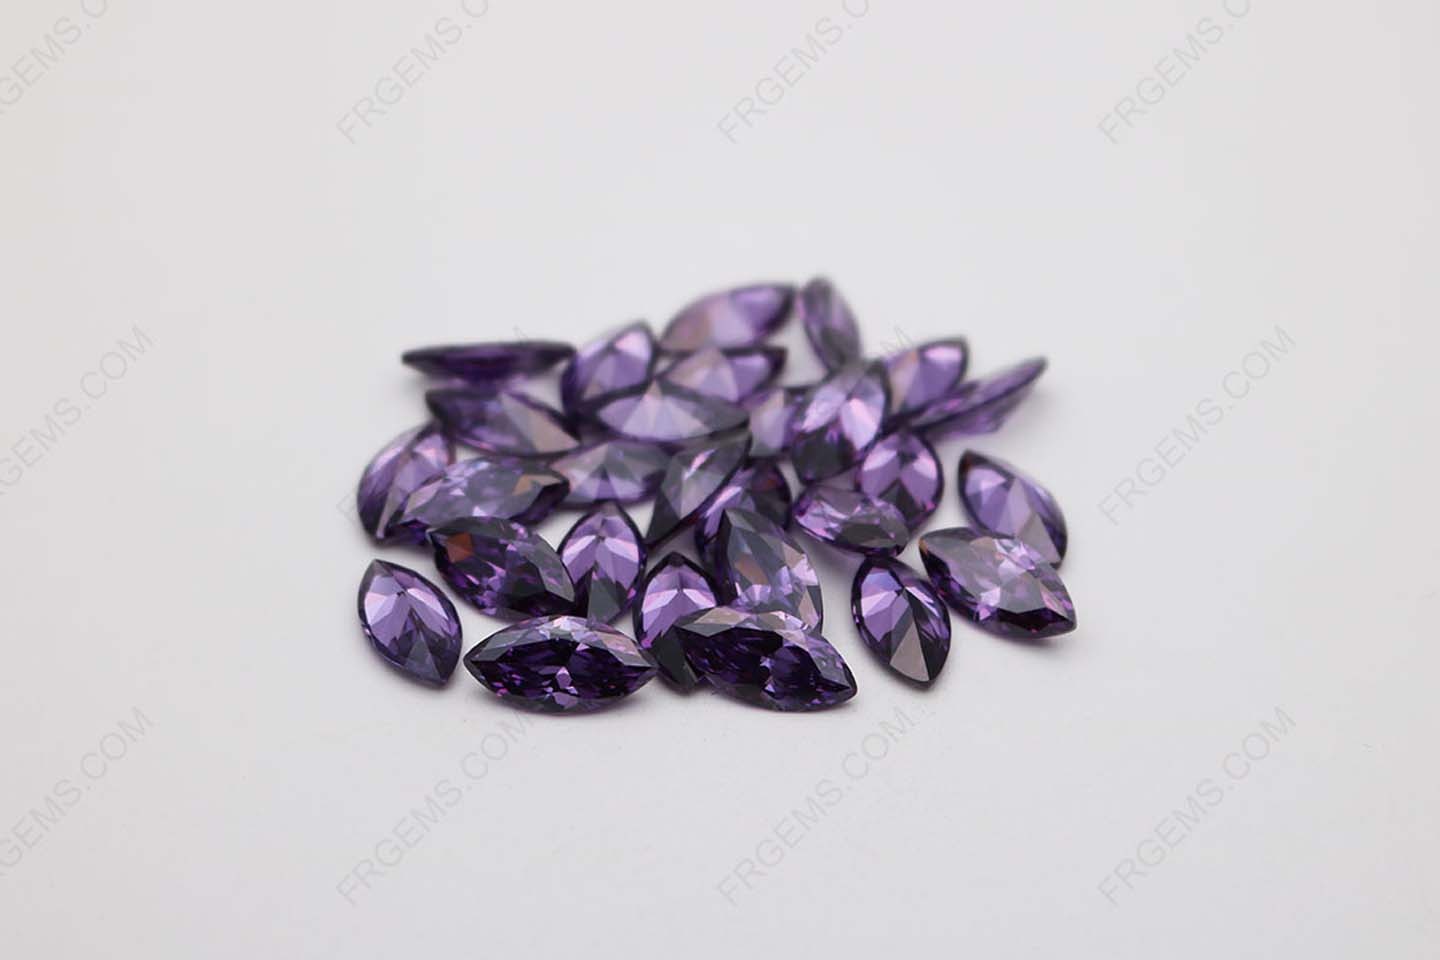 Cubic Zirconia Amethyst Color Marquise Shape faceted cut 10x5mm stones CZ10 IMG_1250